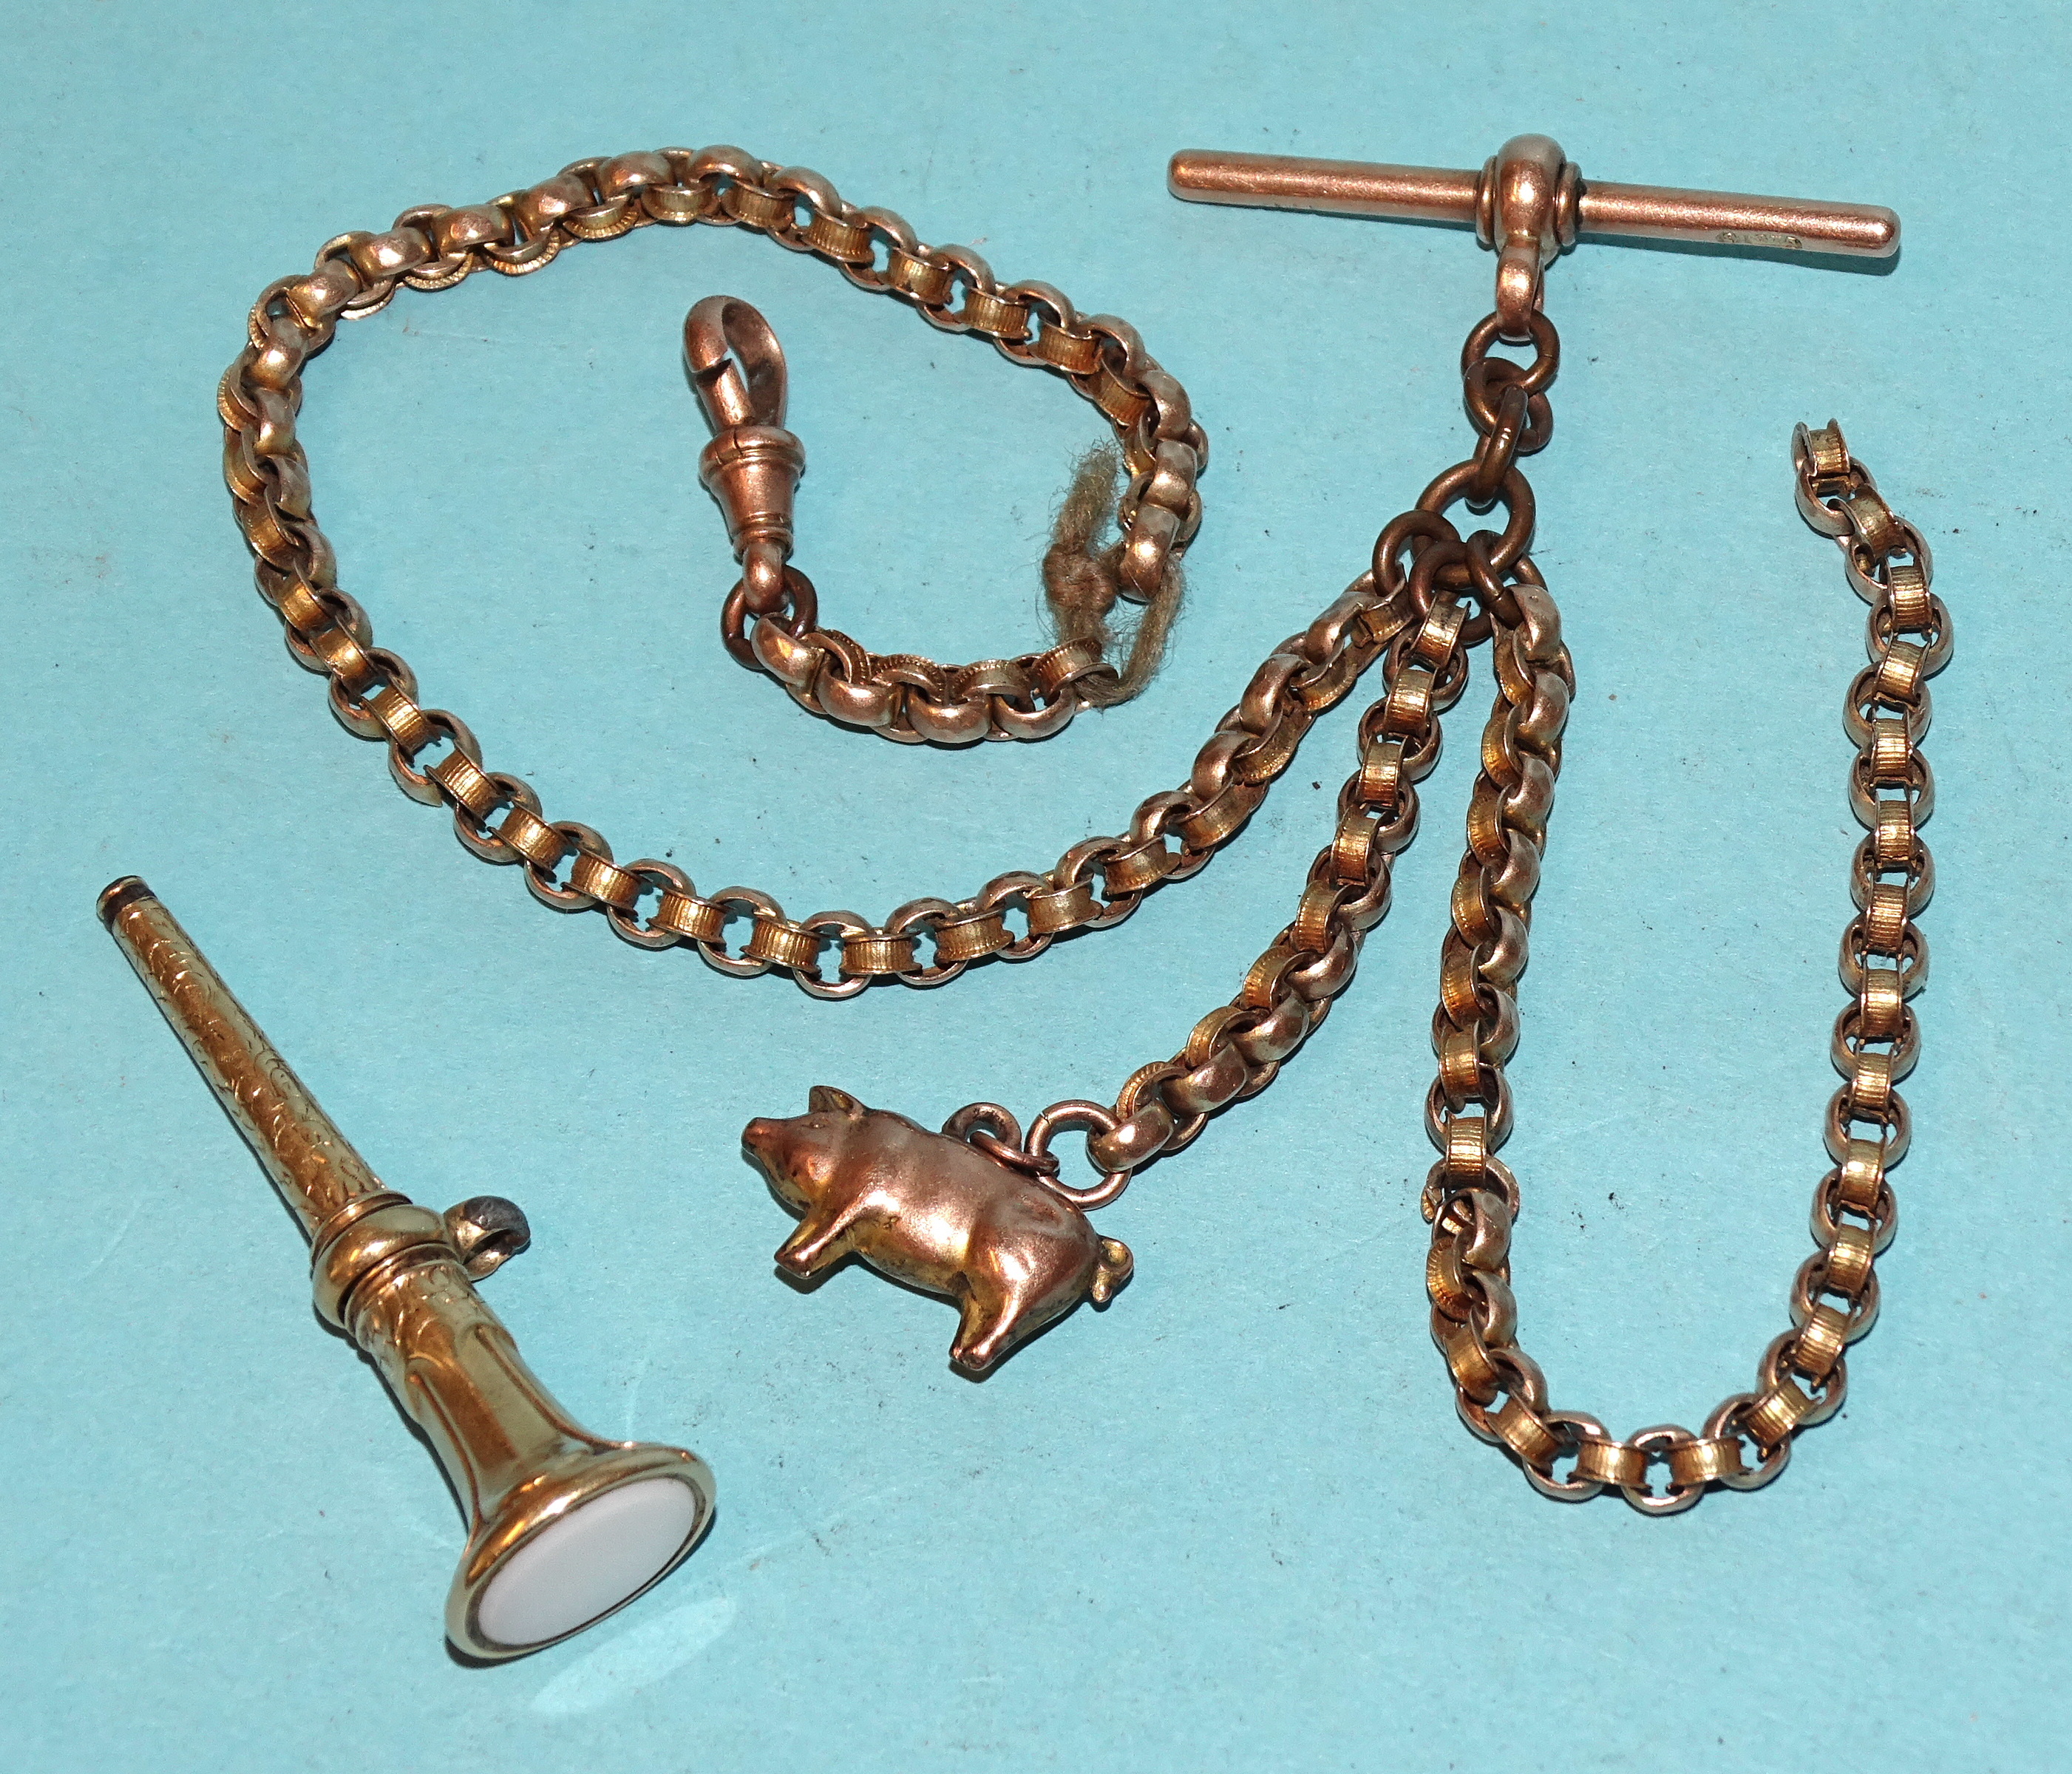 A length of Victorian gold watch chain with a T-bar, marked 9ct, a shackle and a pig charm, gross